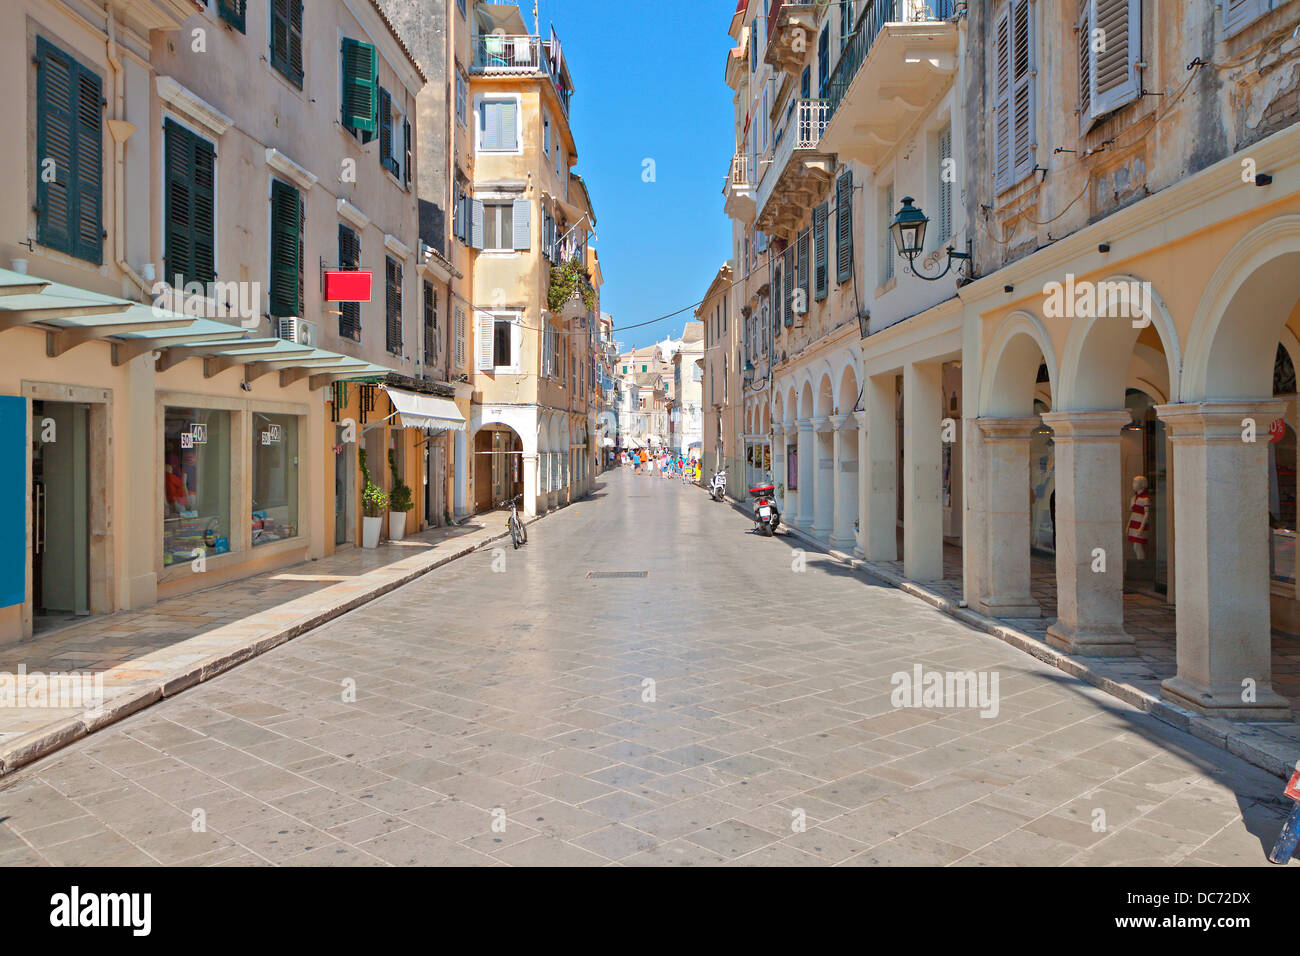 The Piazza at the old town of Corfu island in Greece Stock Photo